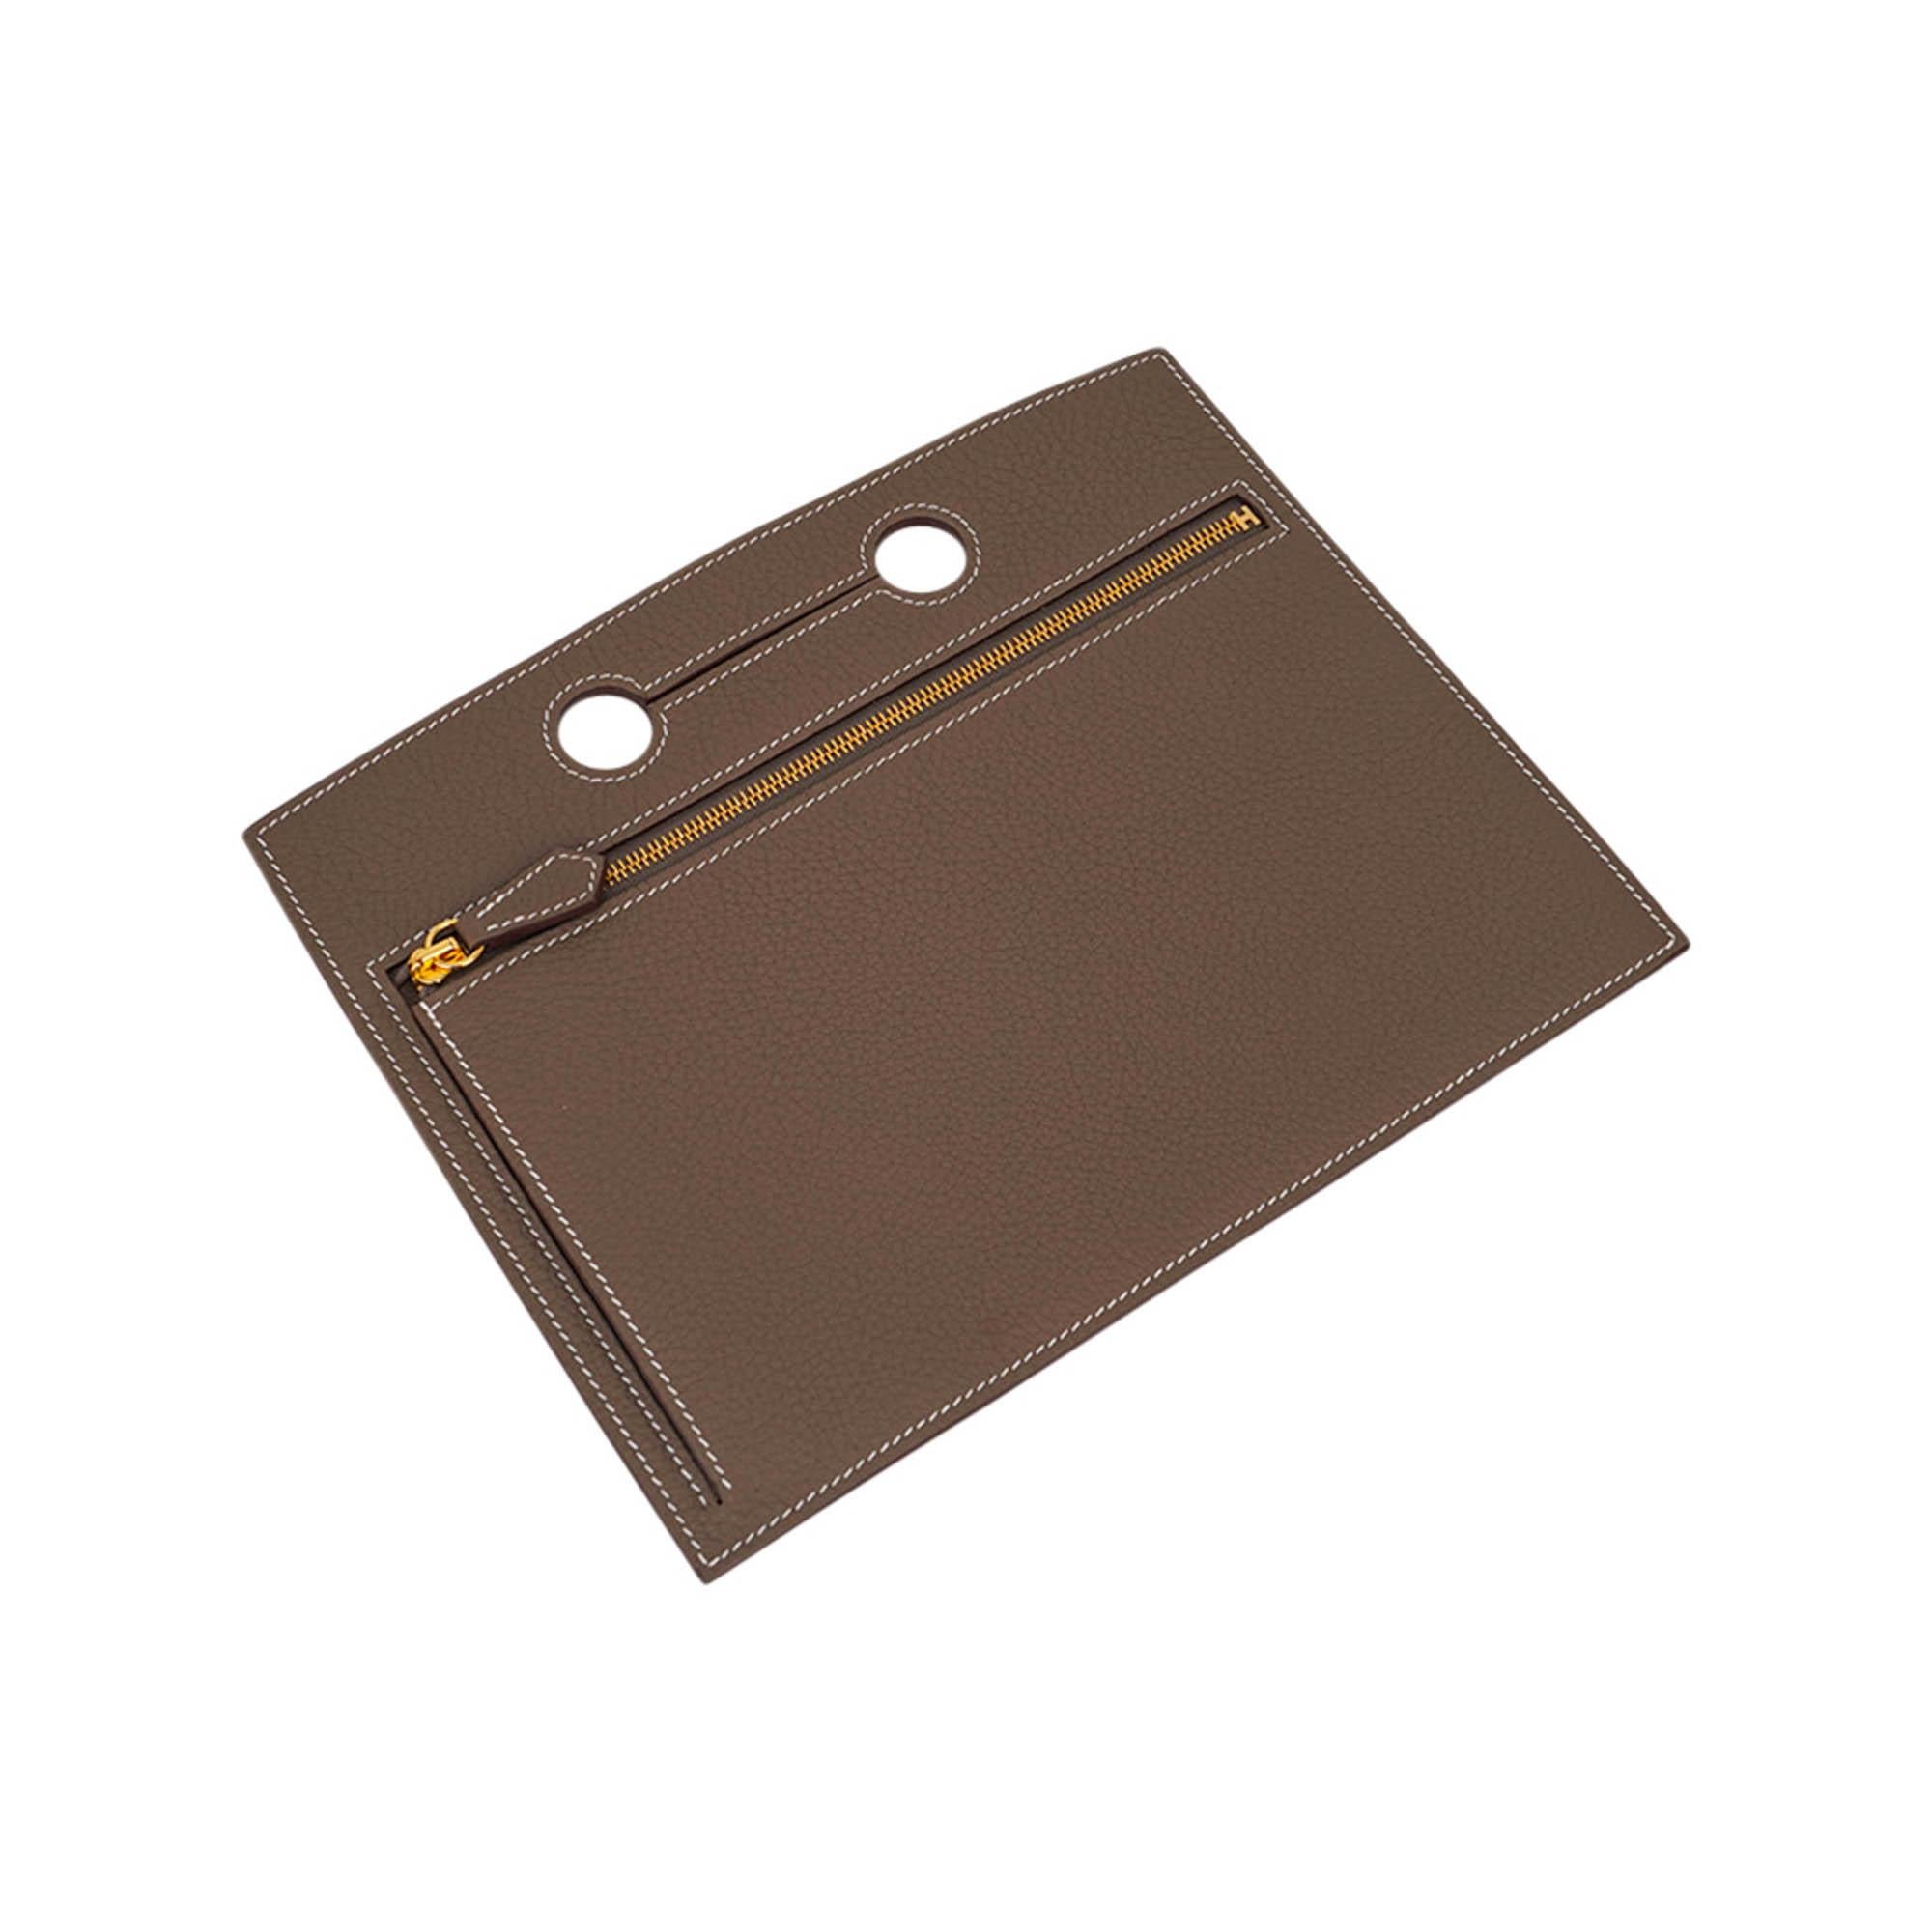 Mightychic offers an Hermes Backpocket 25 Pouch featured in neutral Etoupe.
Beautiful in Togo leather with gold zipper.
This flat Backpocket fits easily over the handle and features a partitioned interior.
In a fabulous neutral color!  And fun to